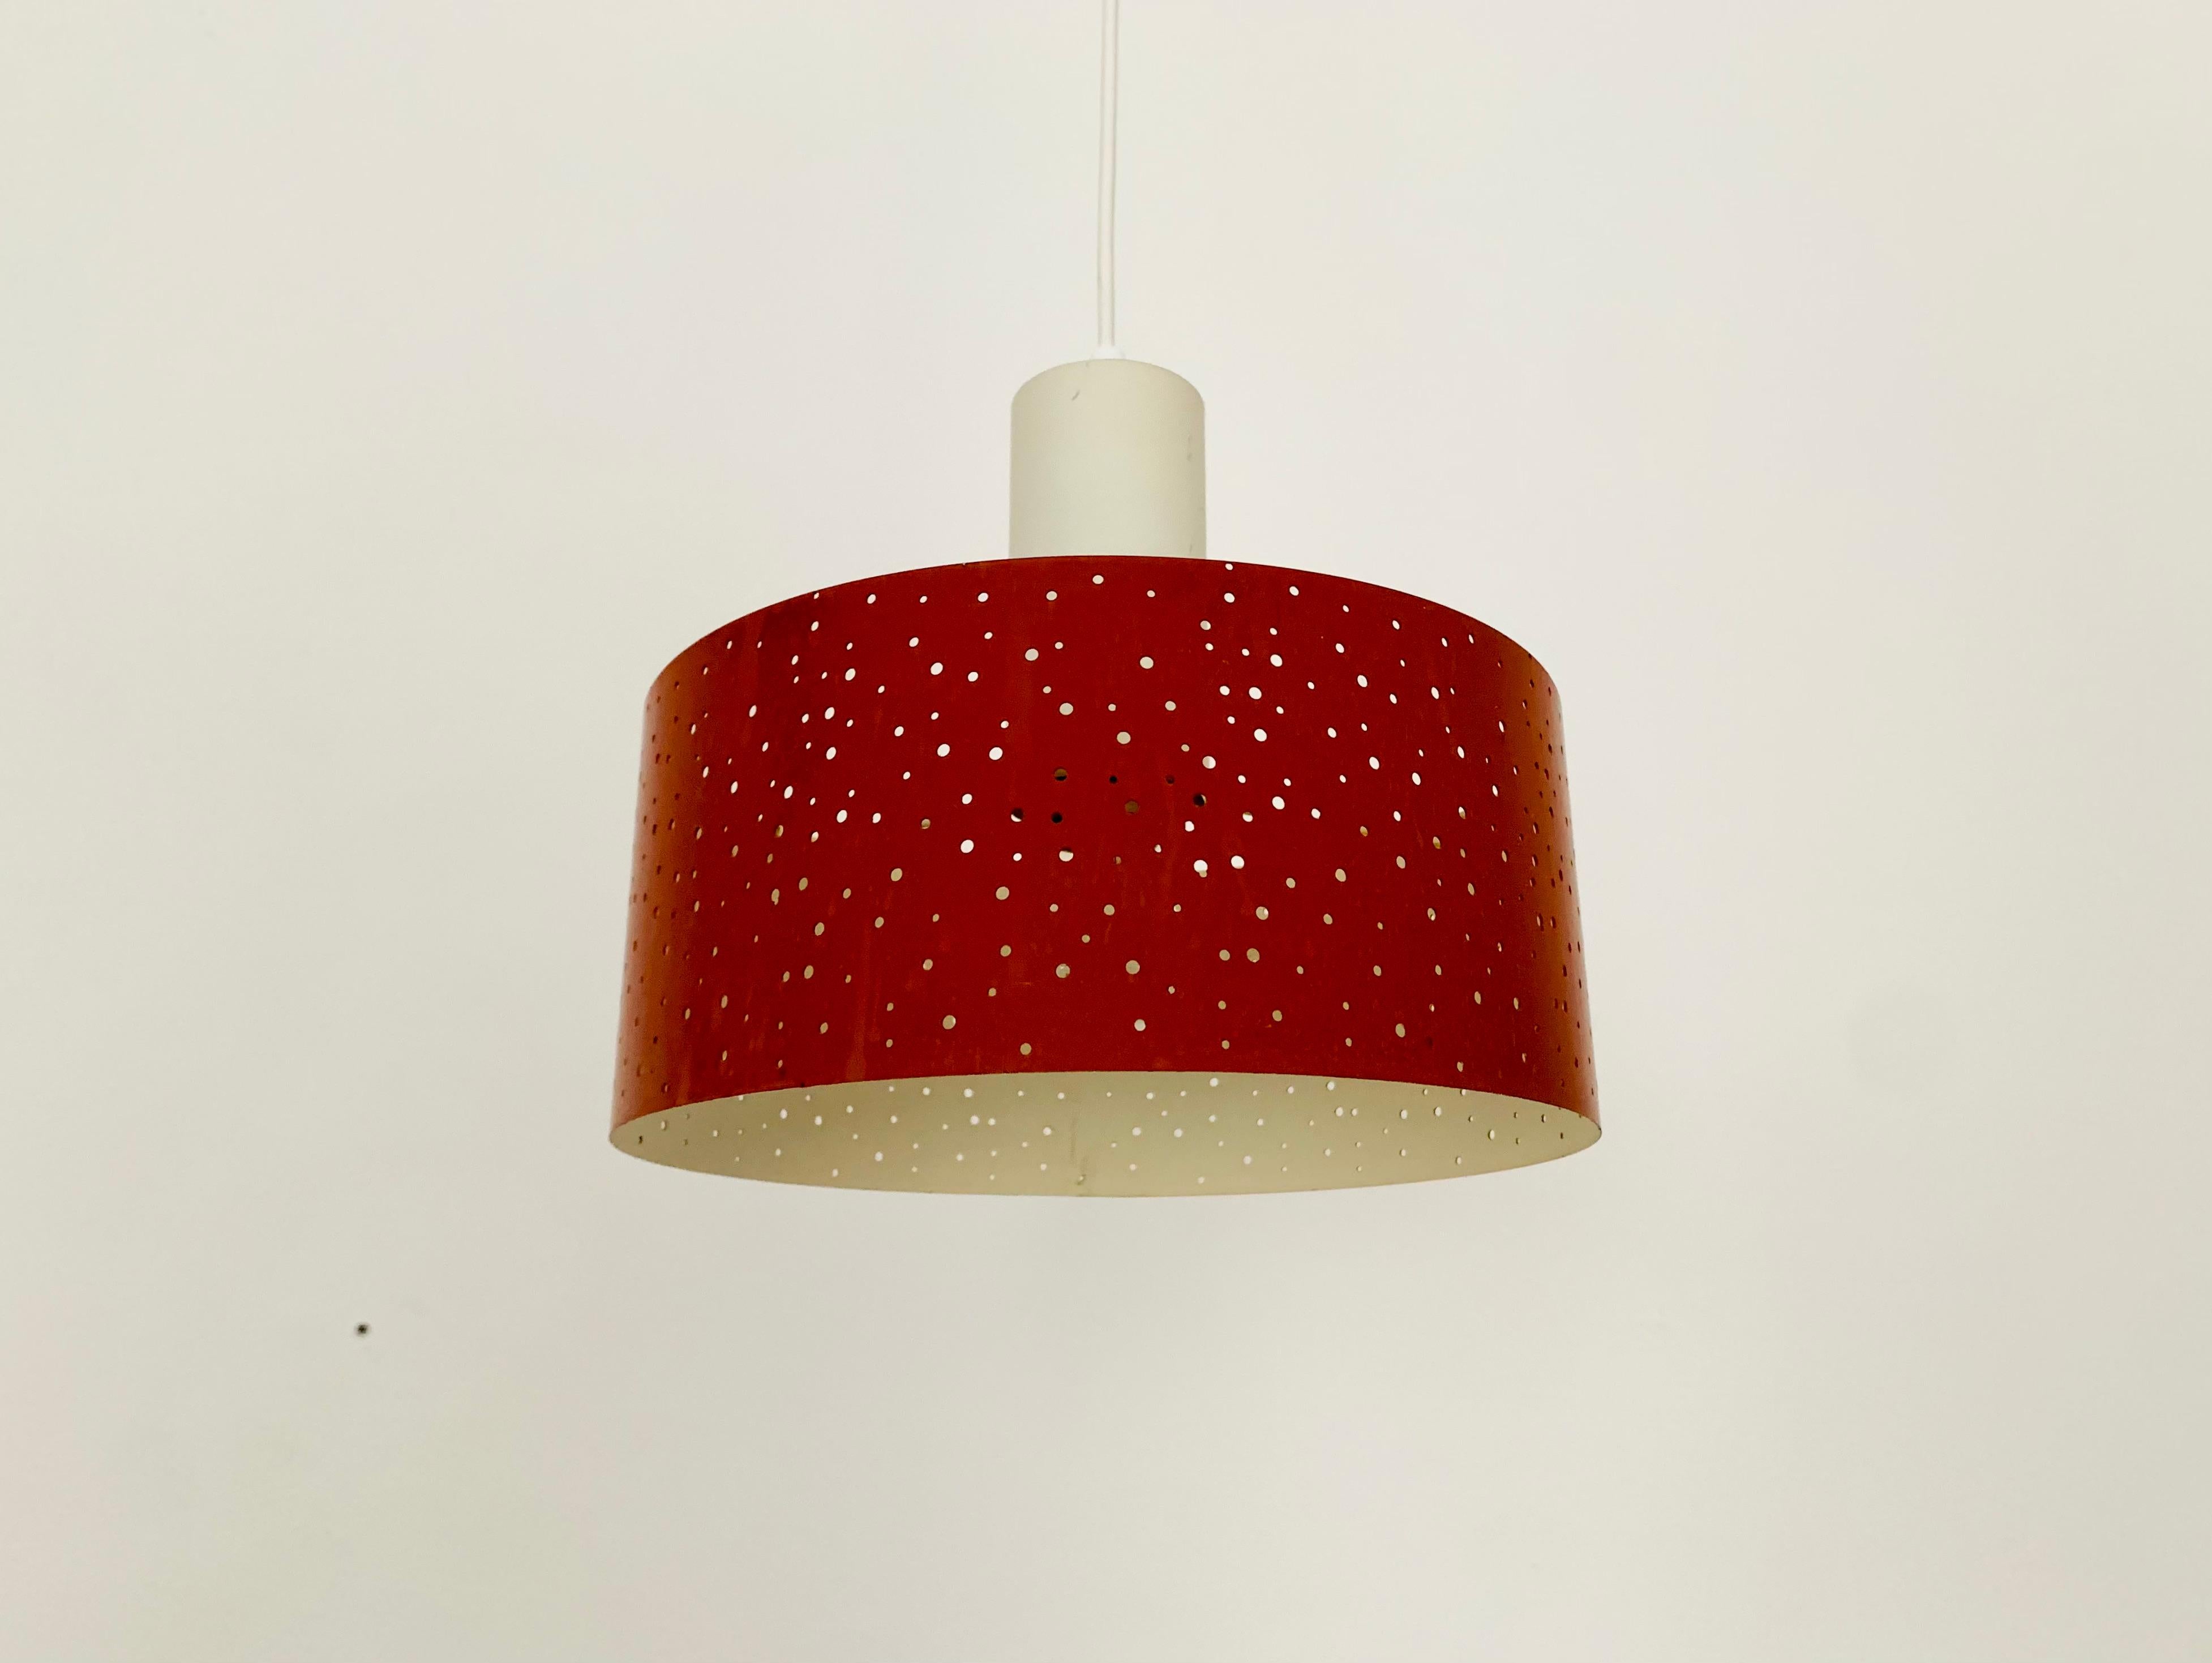 Very nice pendant lamp from the 1950s.
The lighting effect of the lamp is extremely beautiful.
The design creates a very elegant and pleasant light.
The lamp creates a very cozy atmosphere.

Design: Ernst Igl
Manufacturer: